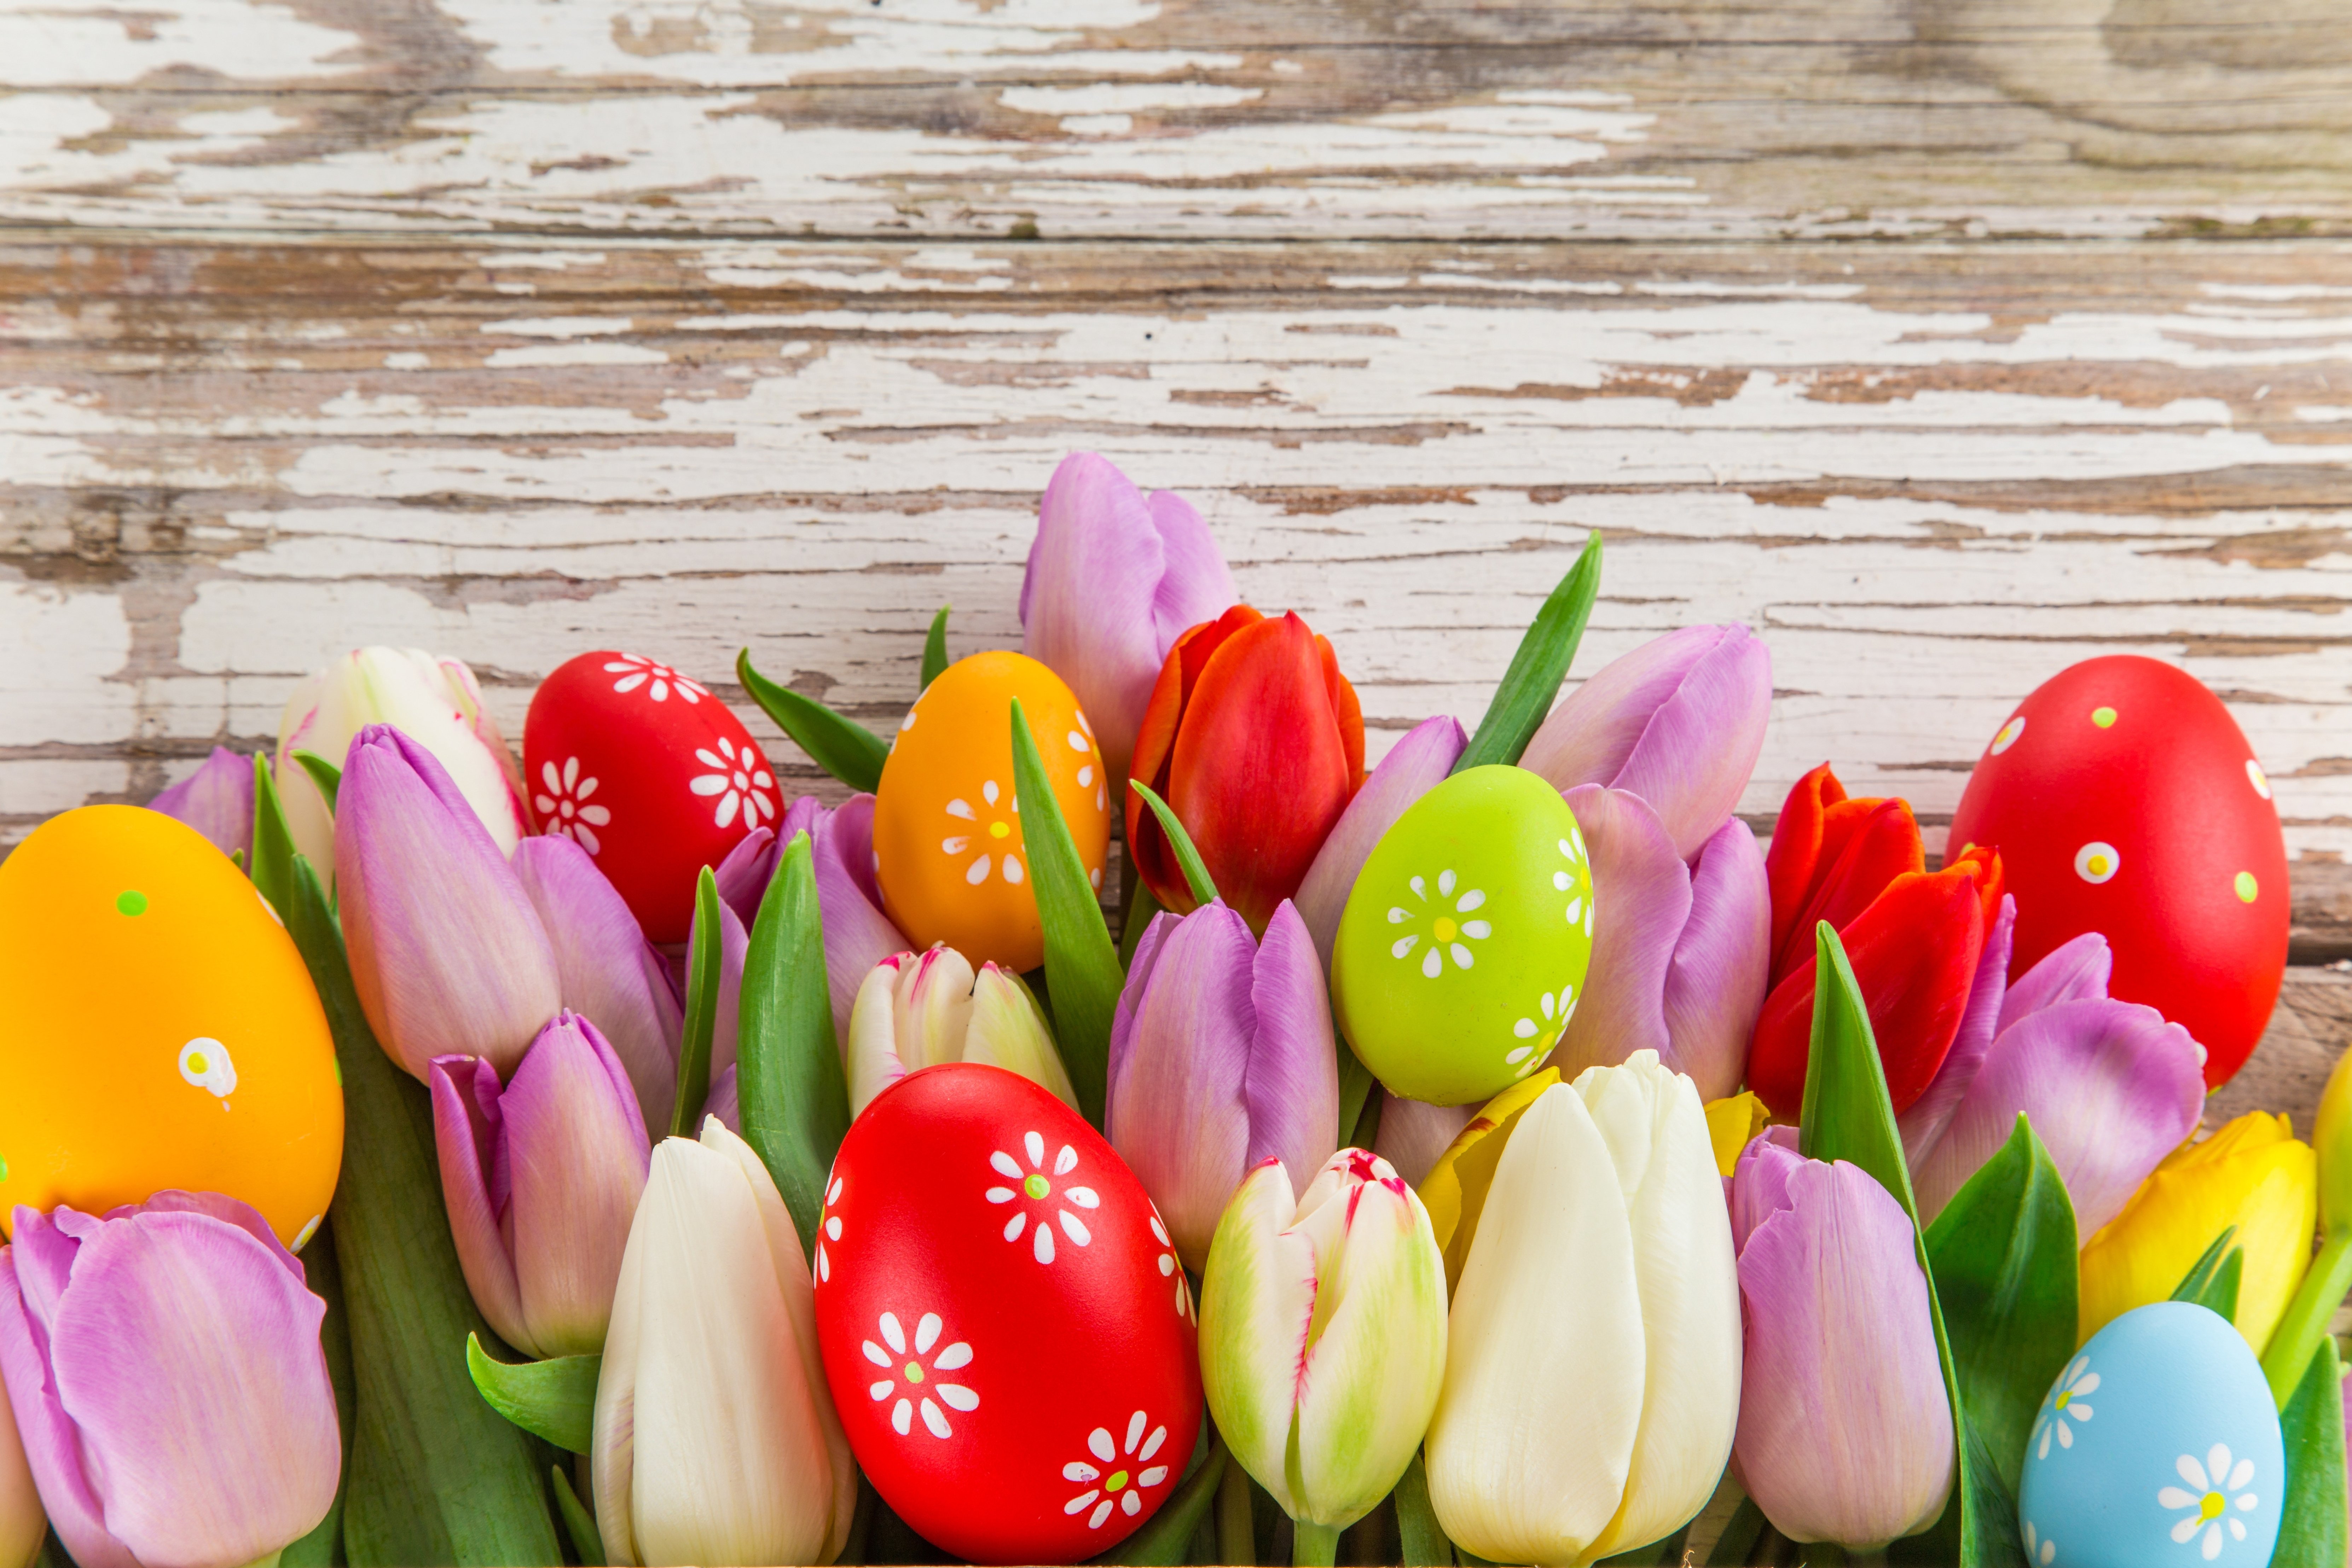 Easter Backgrounds download free